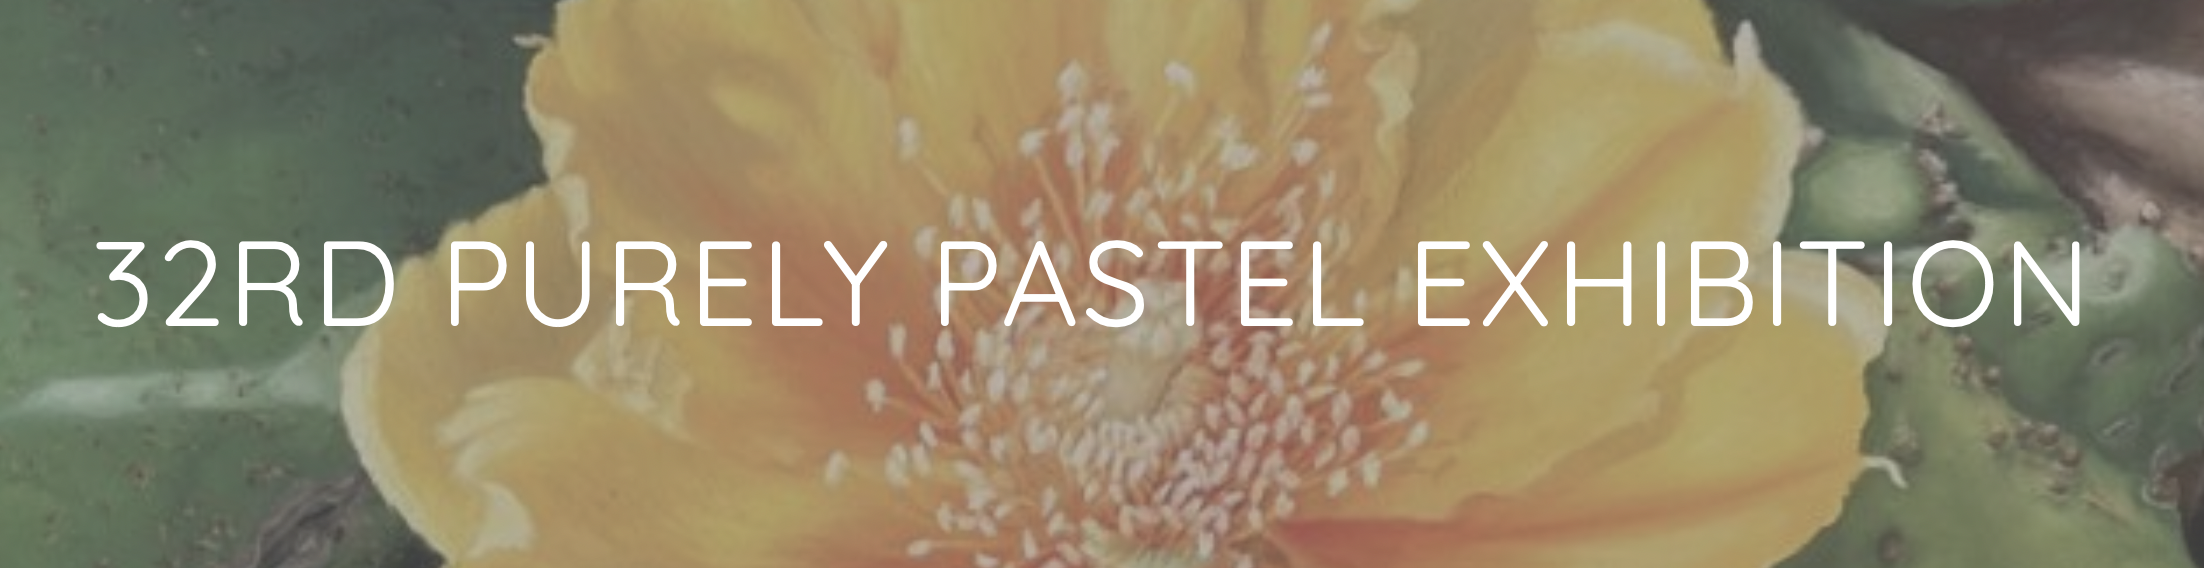 PAC 32nd Purely Pastel Exhibition